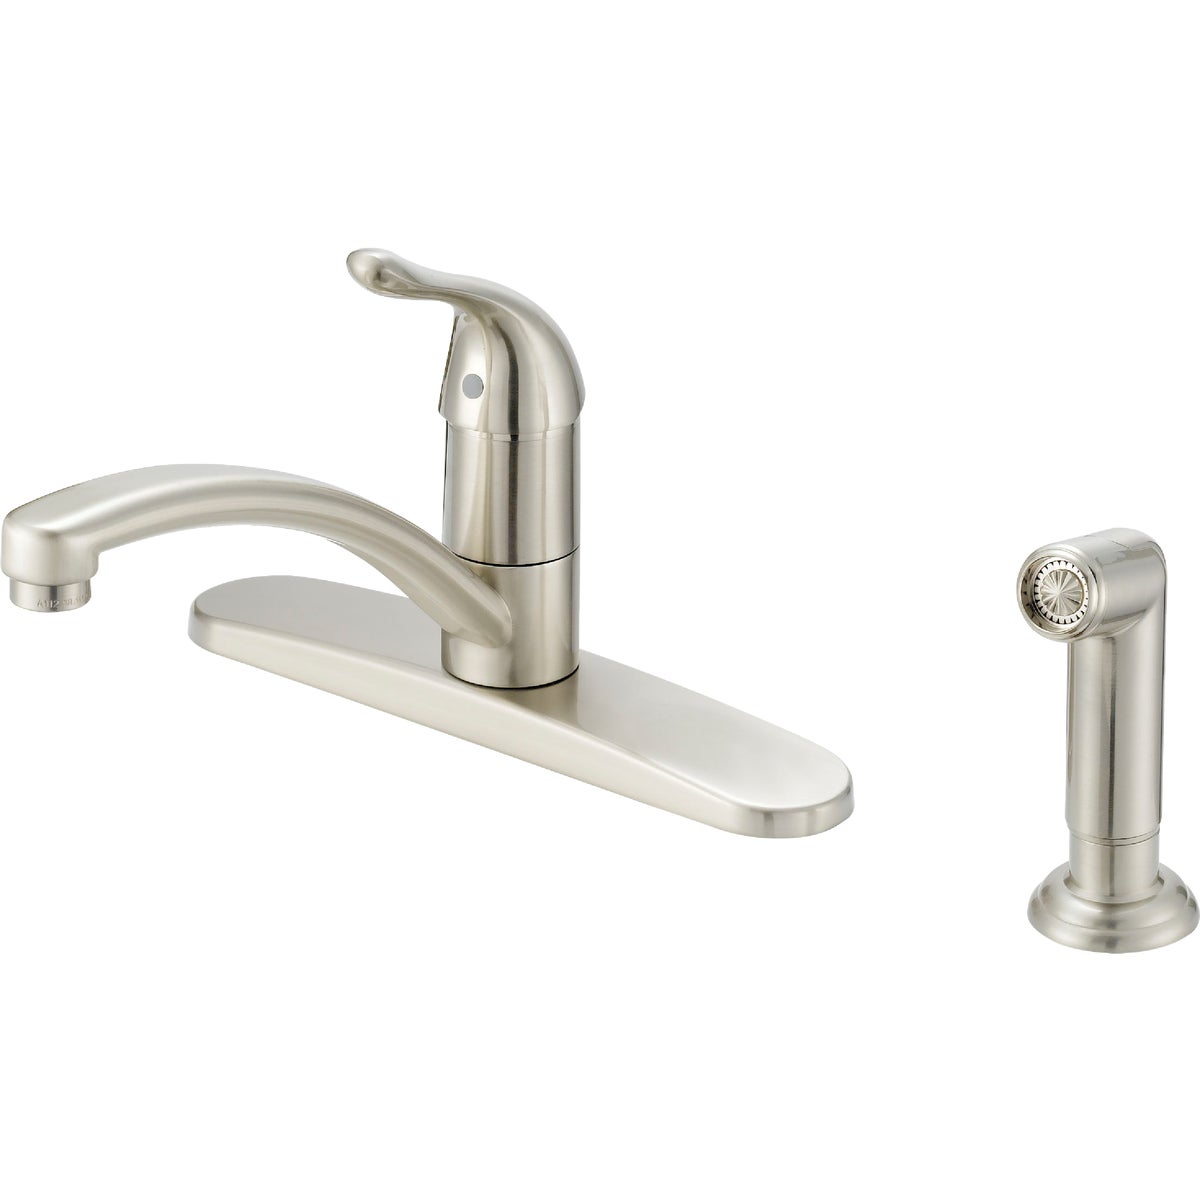 Item 405151, Single handle kitchen faucet with matching finish side spray.